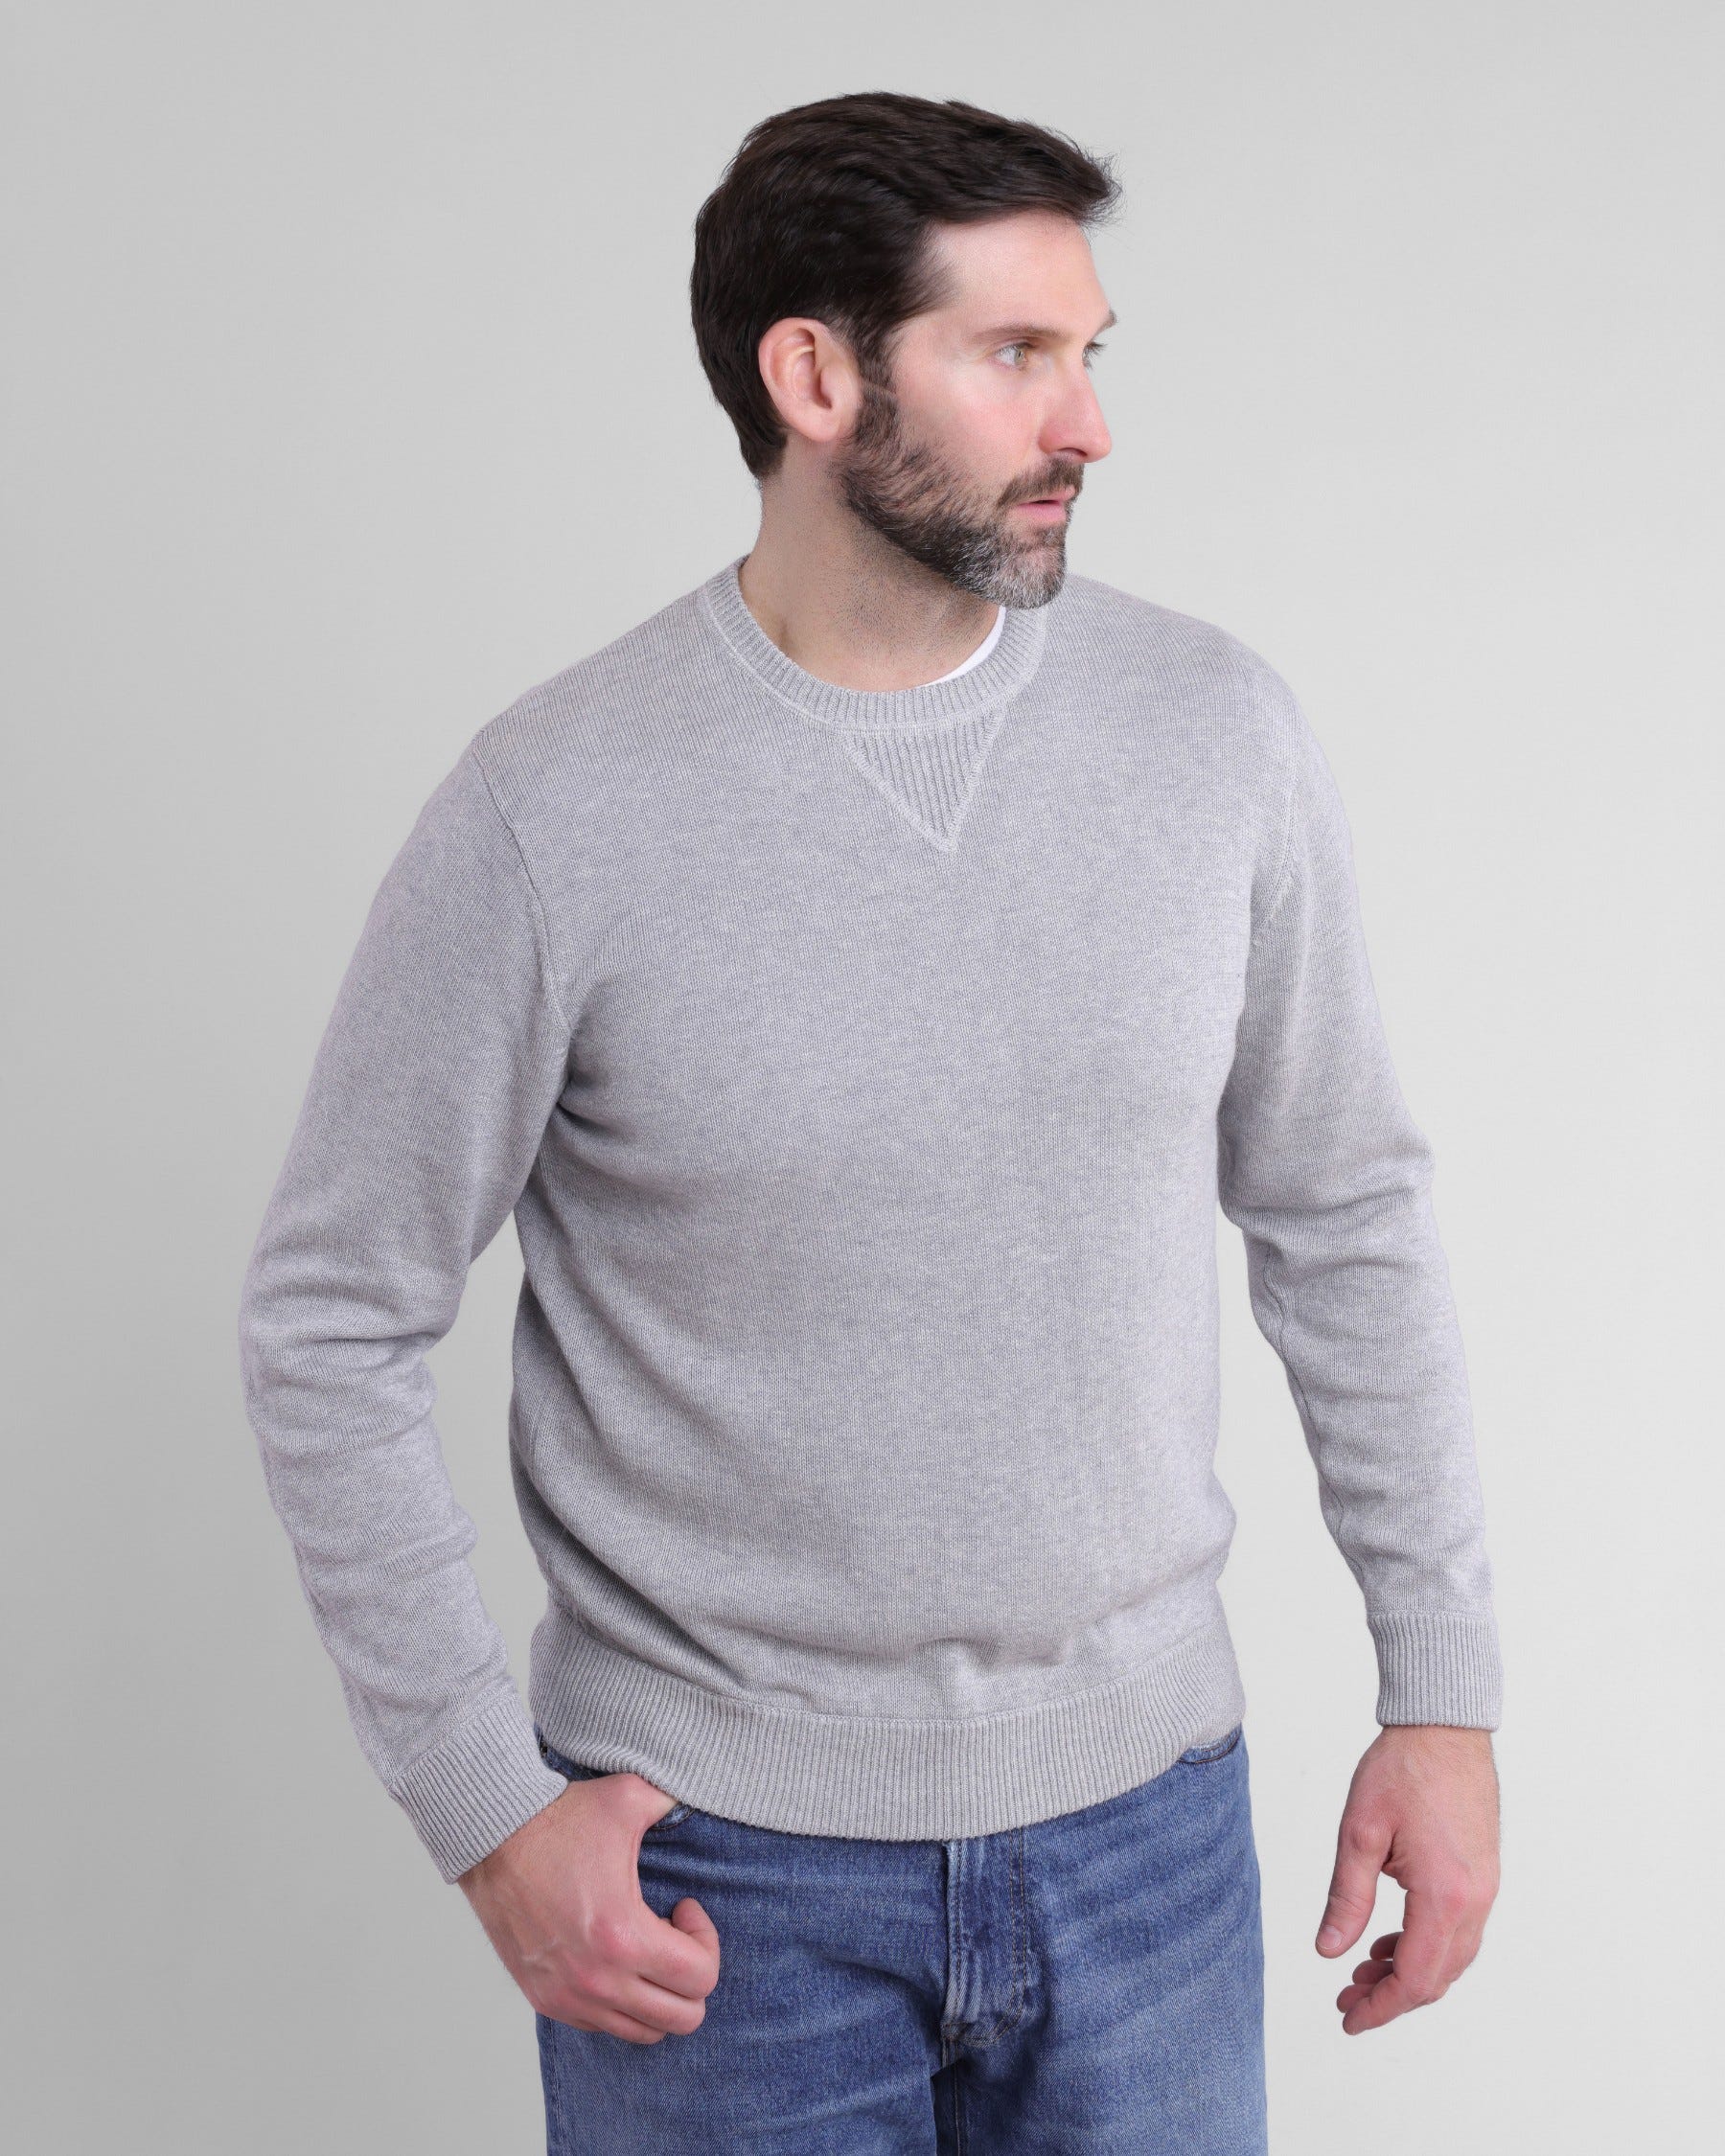 Cotton Cashmere Blend Weekend Sweatshirt Sweater (Choice of Colors) by Alashan Cashmere